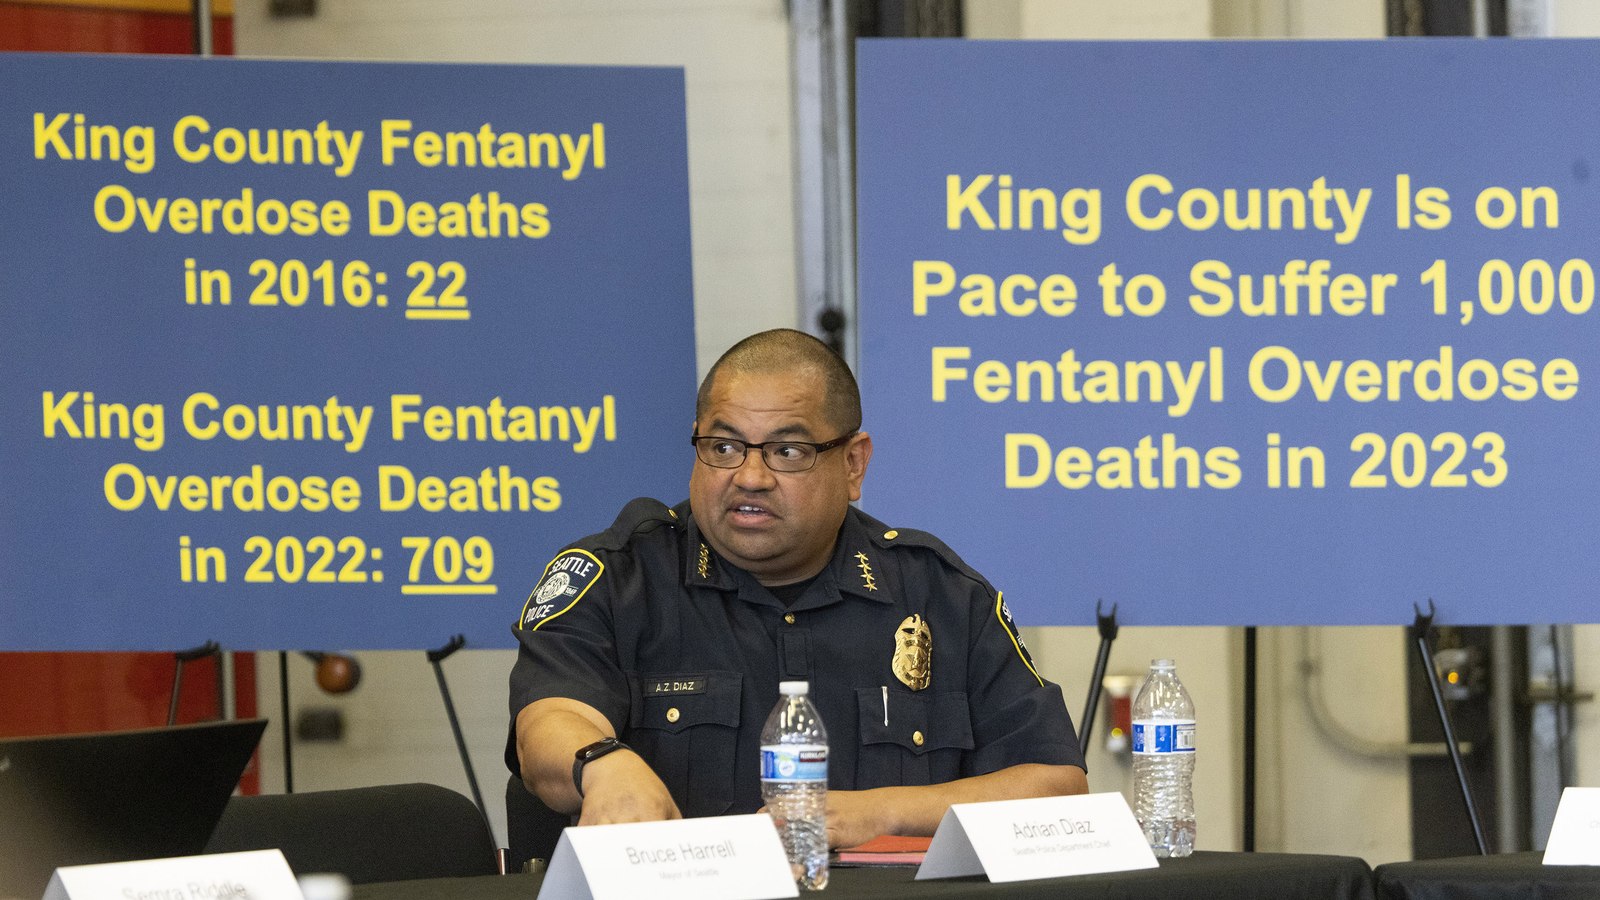 UPDATE: Four Women Hospitalized, One Serious, From Fentanyl ODs At